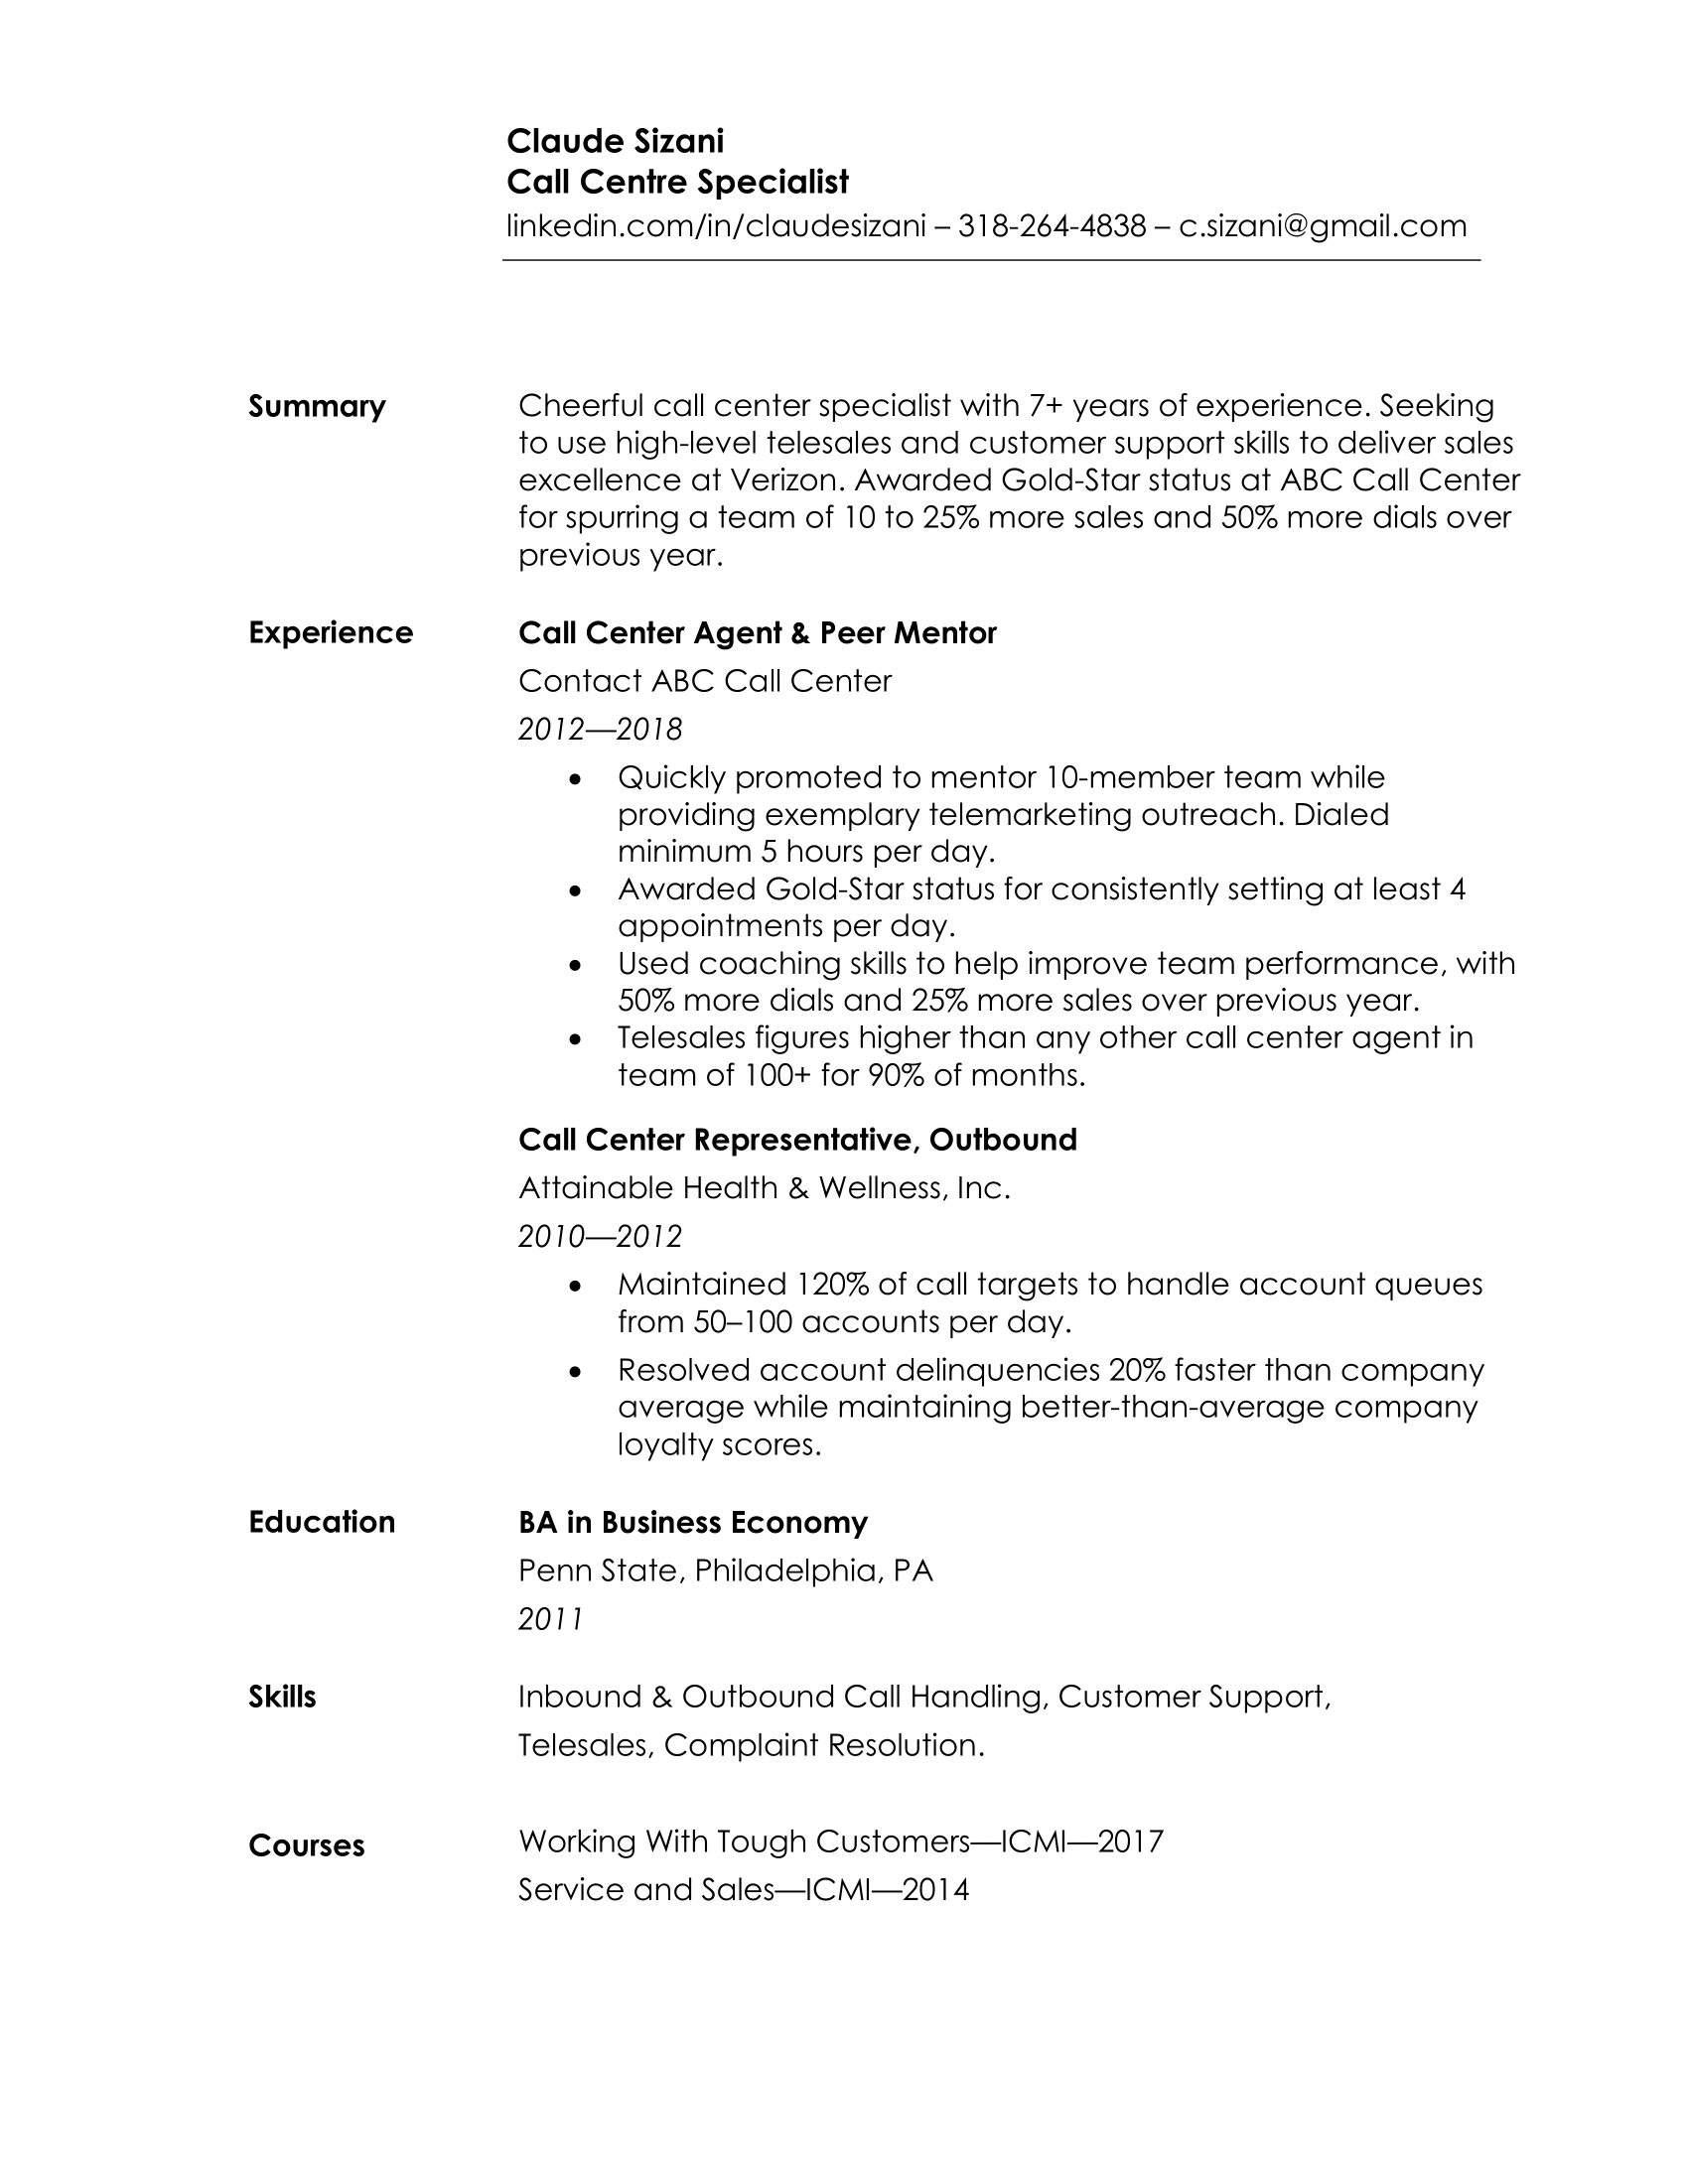 Best Resume Format For A Professional Resume In 2020